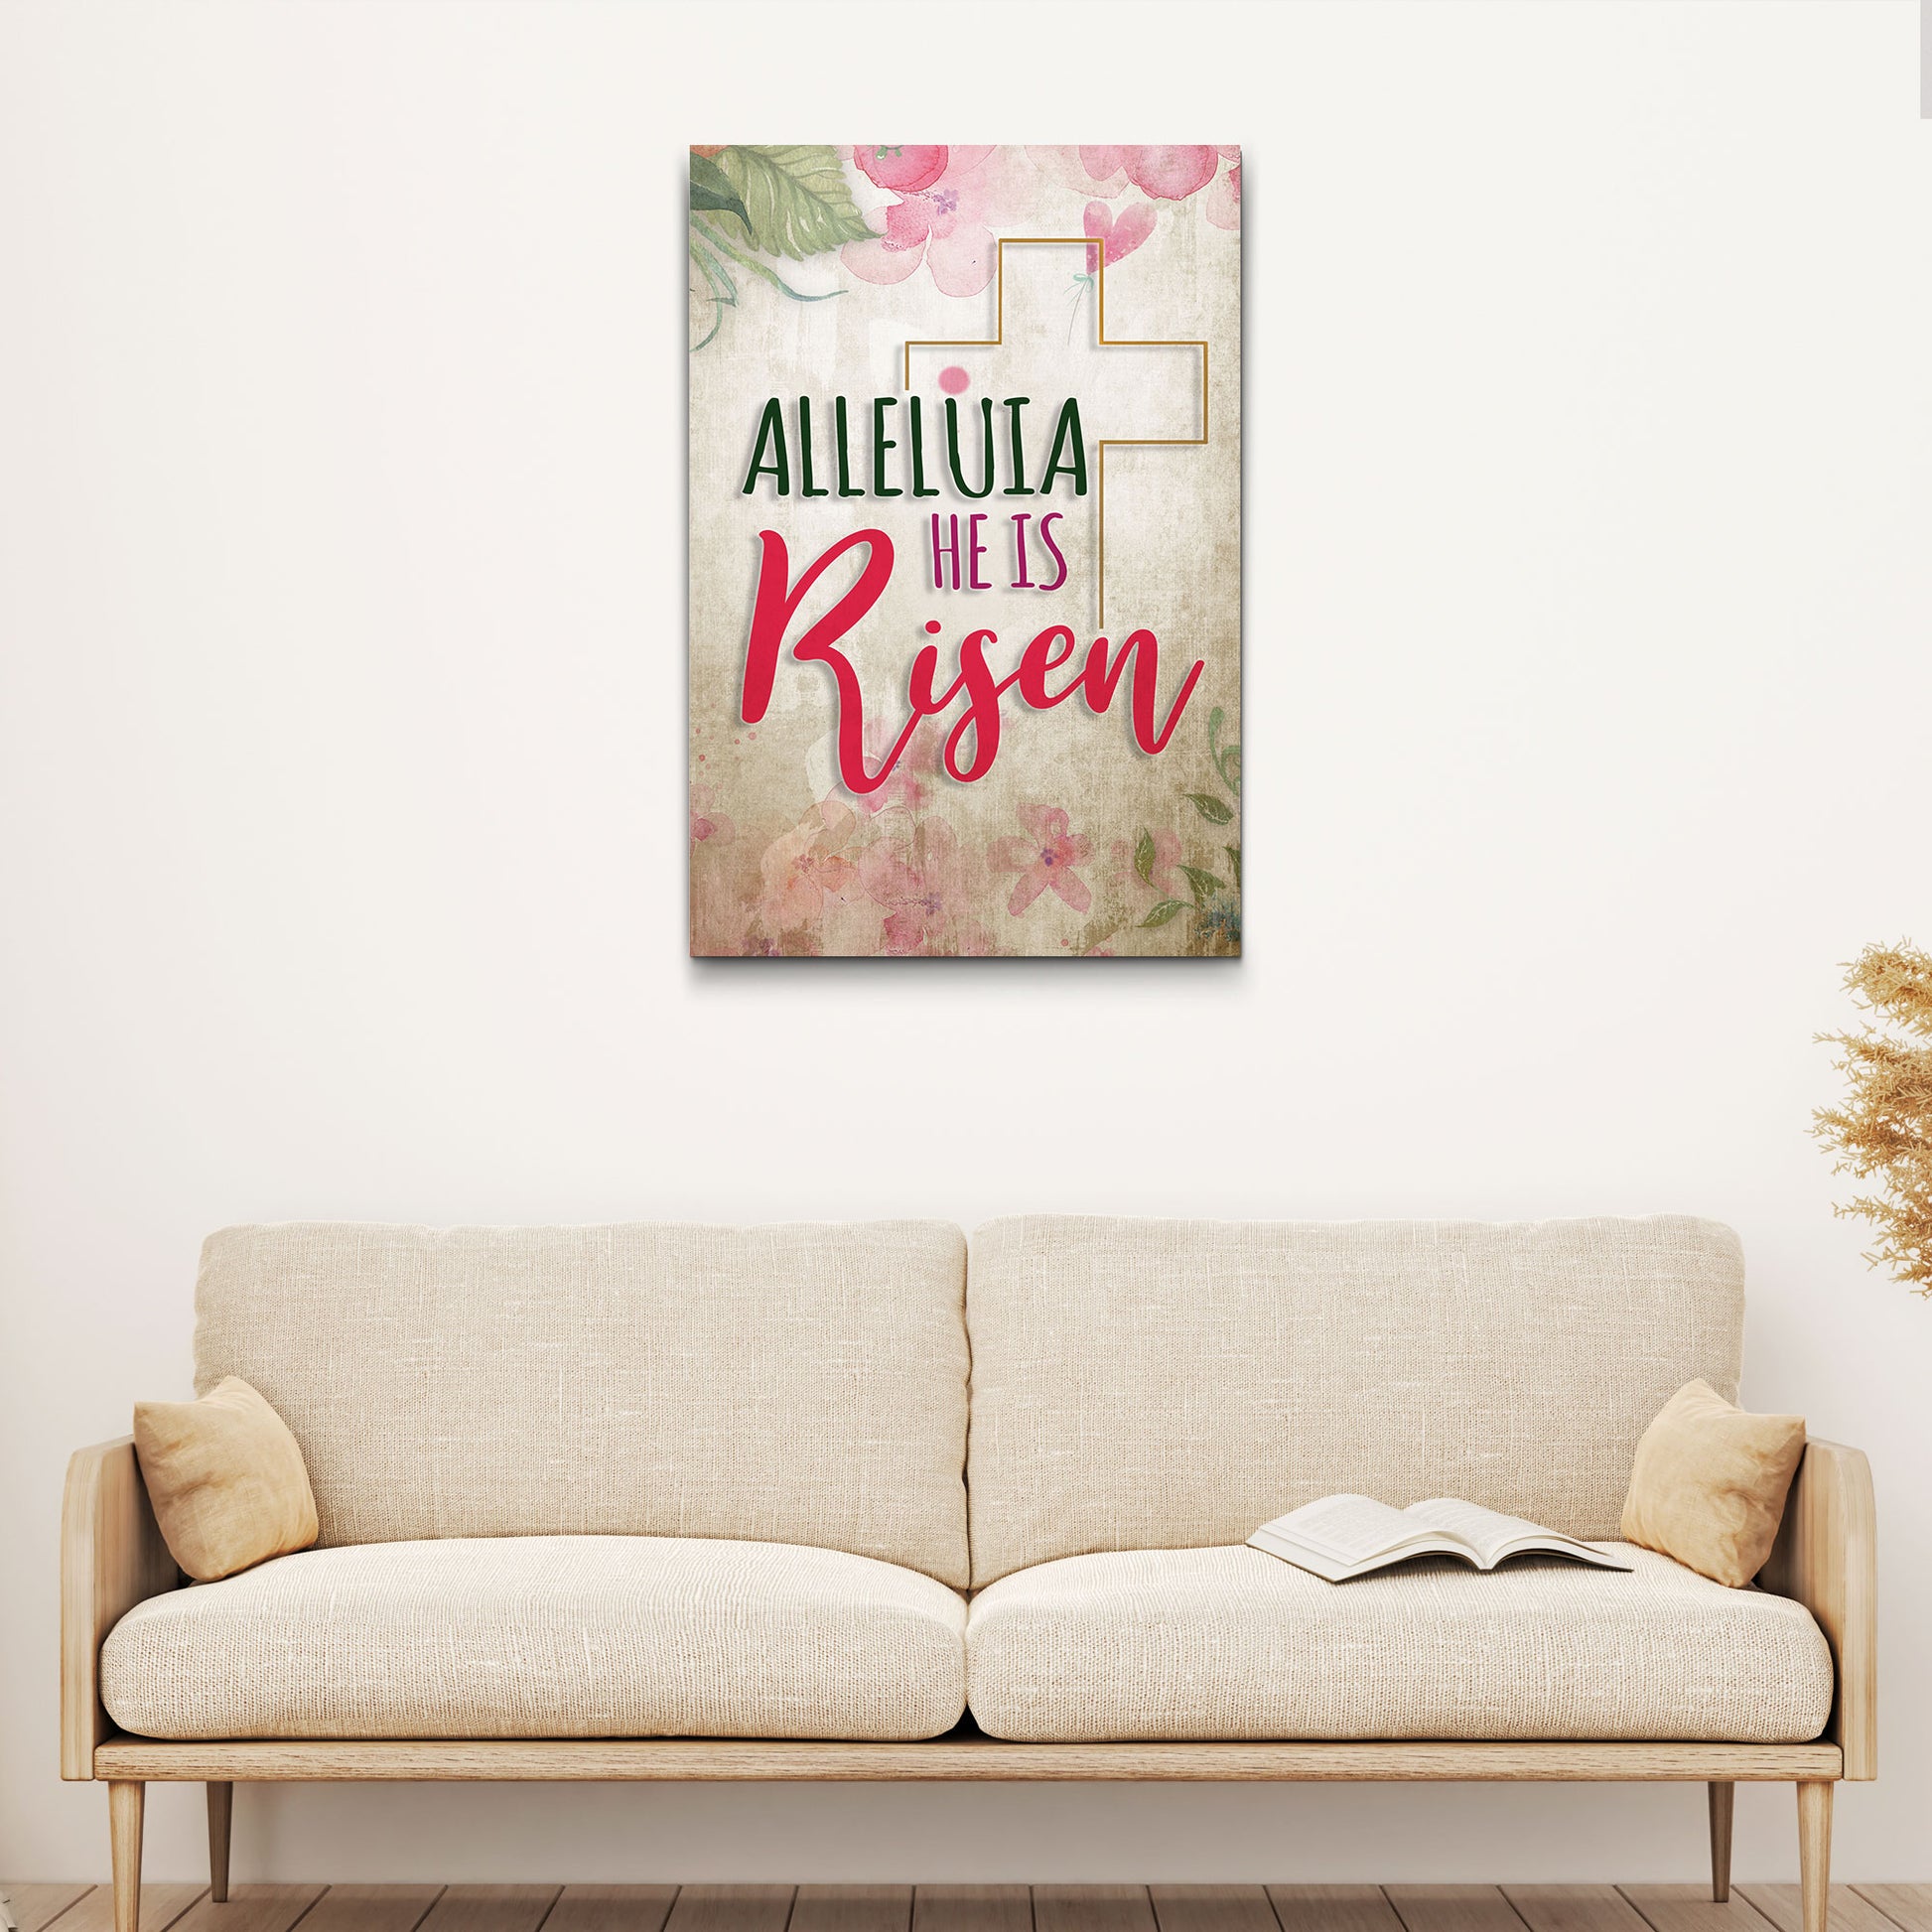 Alleluia, He Is Risen Easter Sign - Image by Tailored Canvases